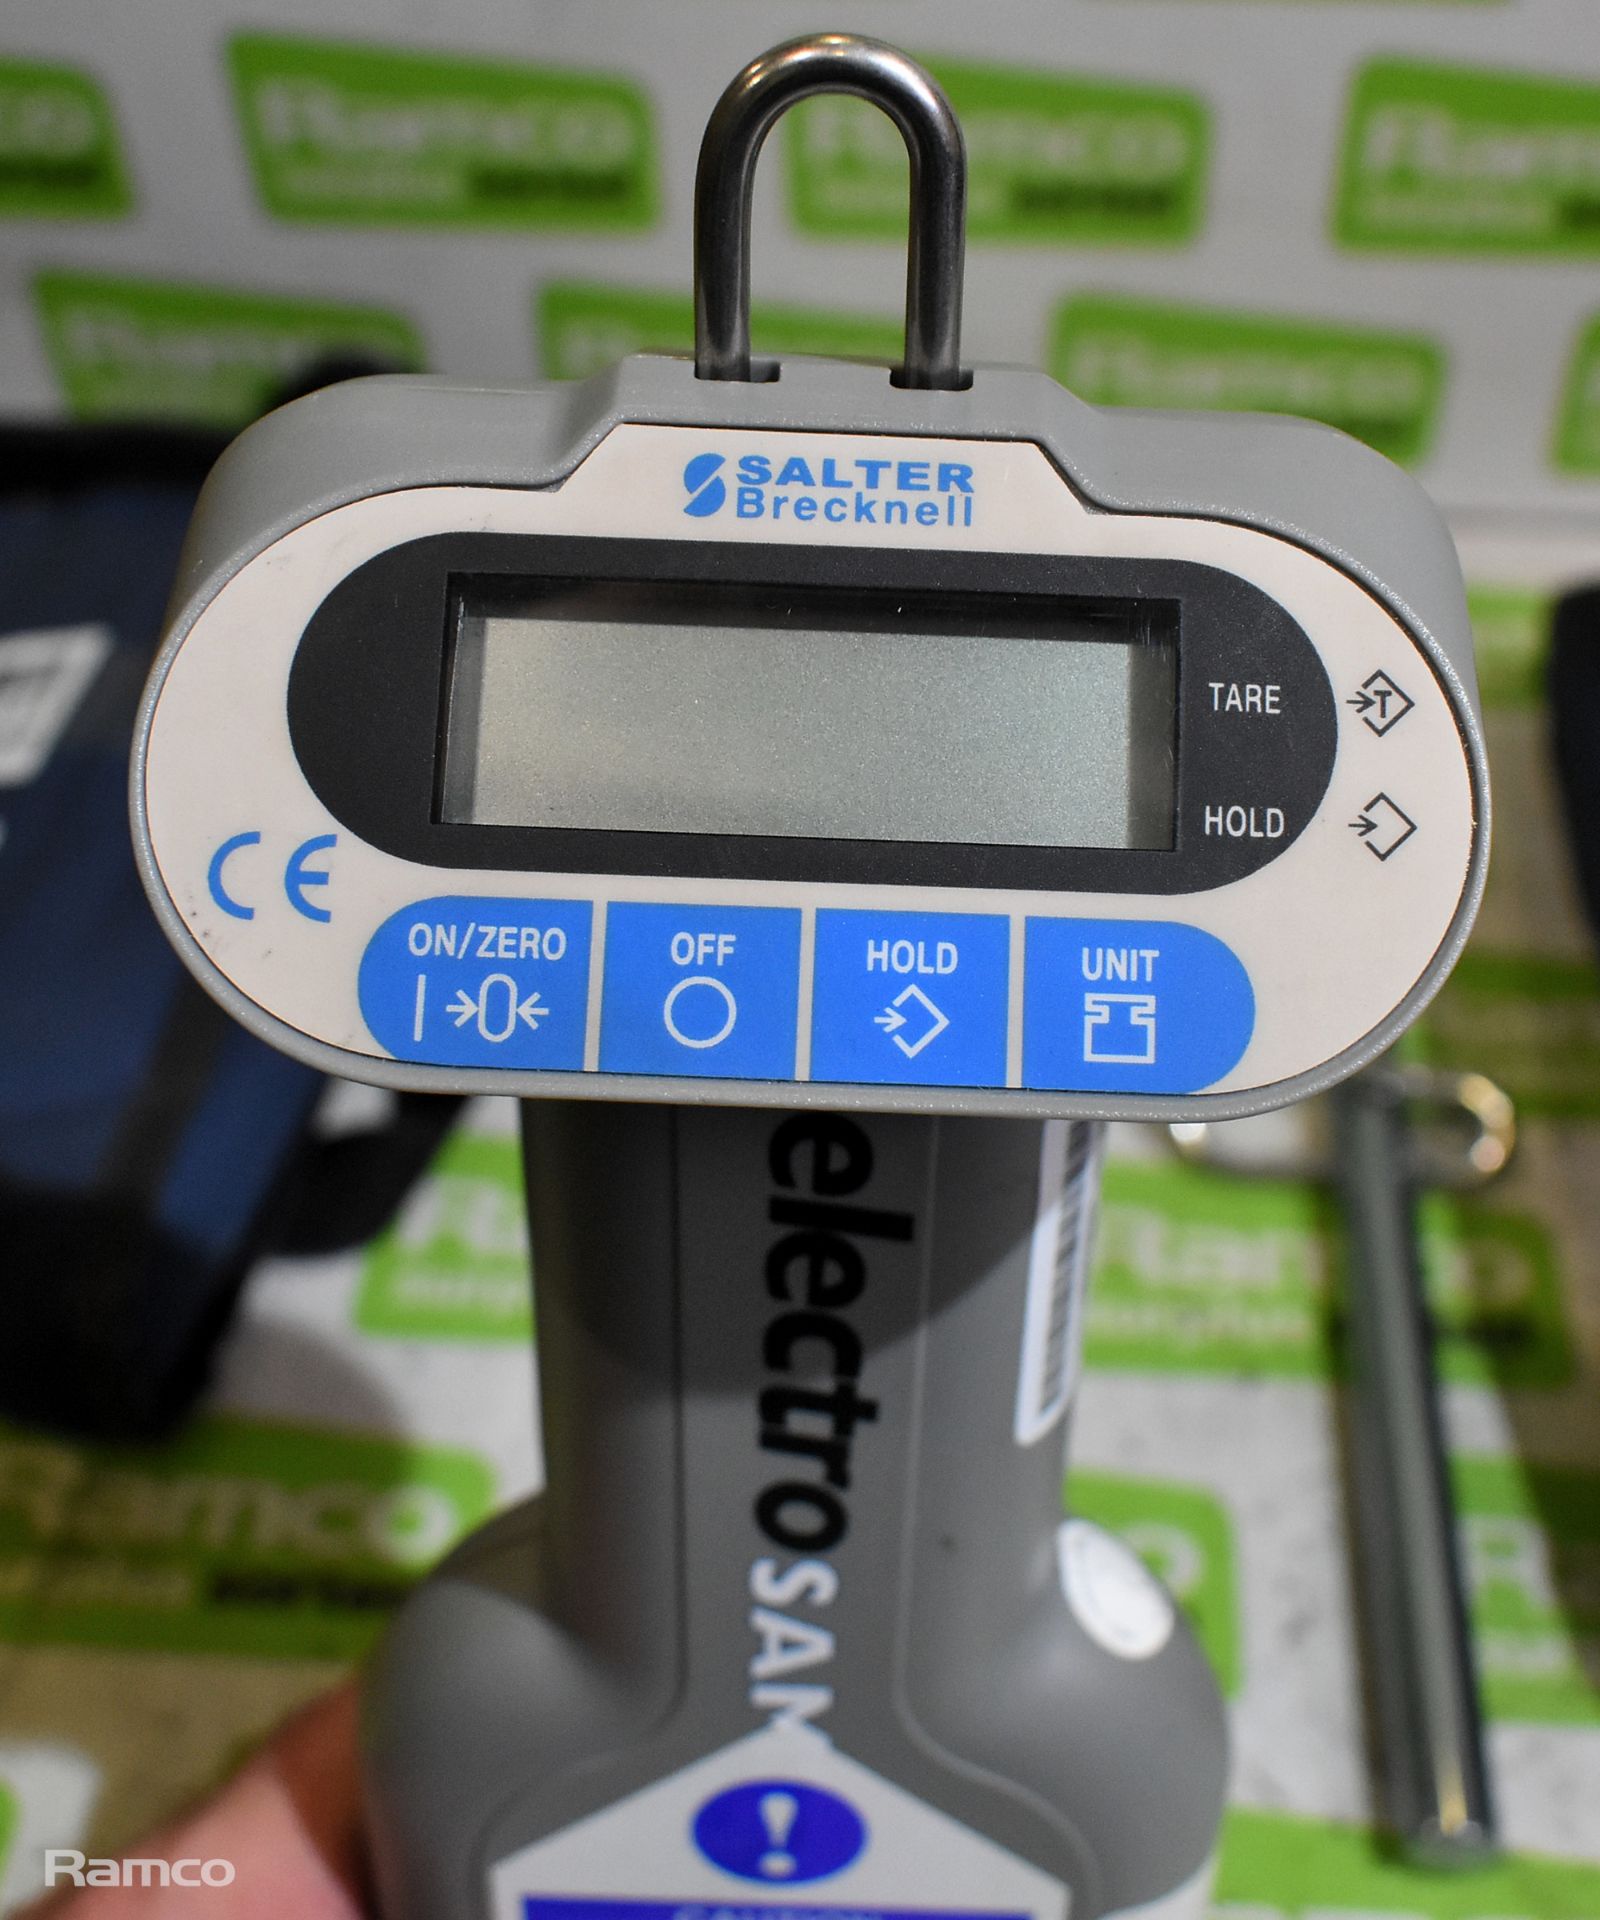 2x Salter Brecknell electroSAM digital weighing scales - Image 3 of 6